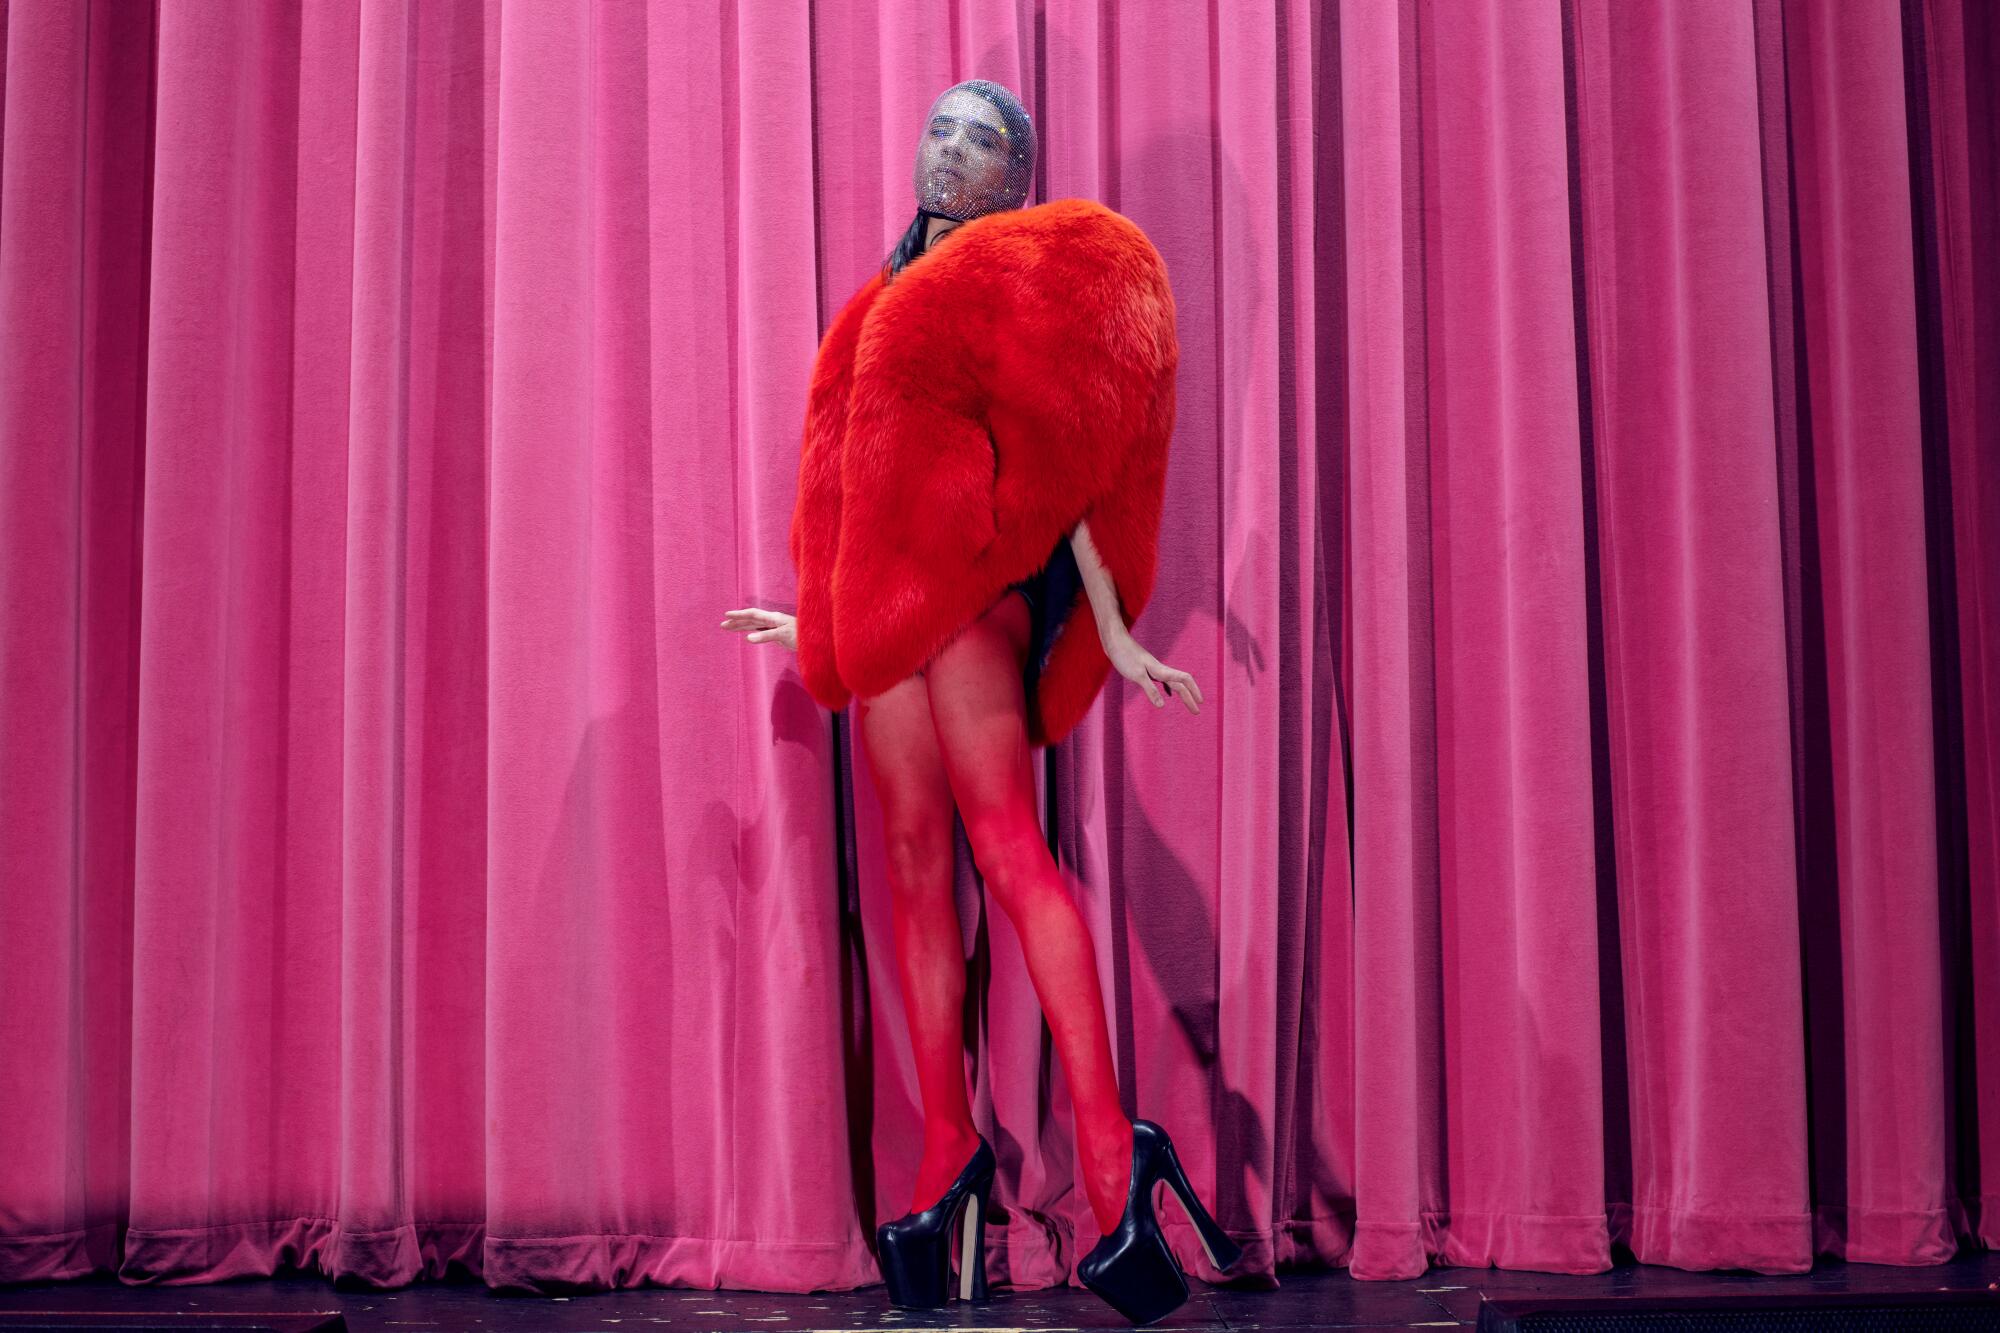 A woman in all red poses before a pink curtain.